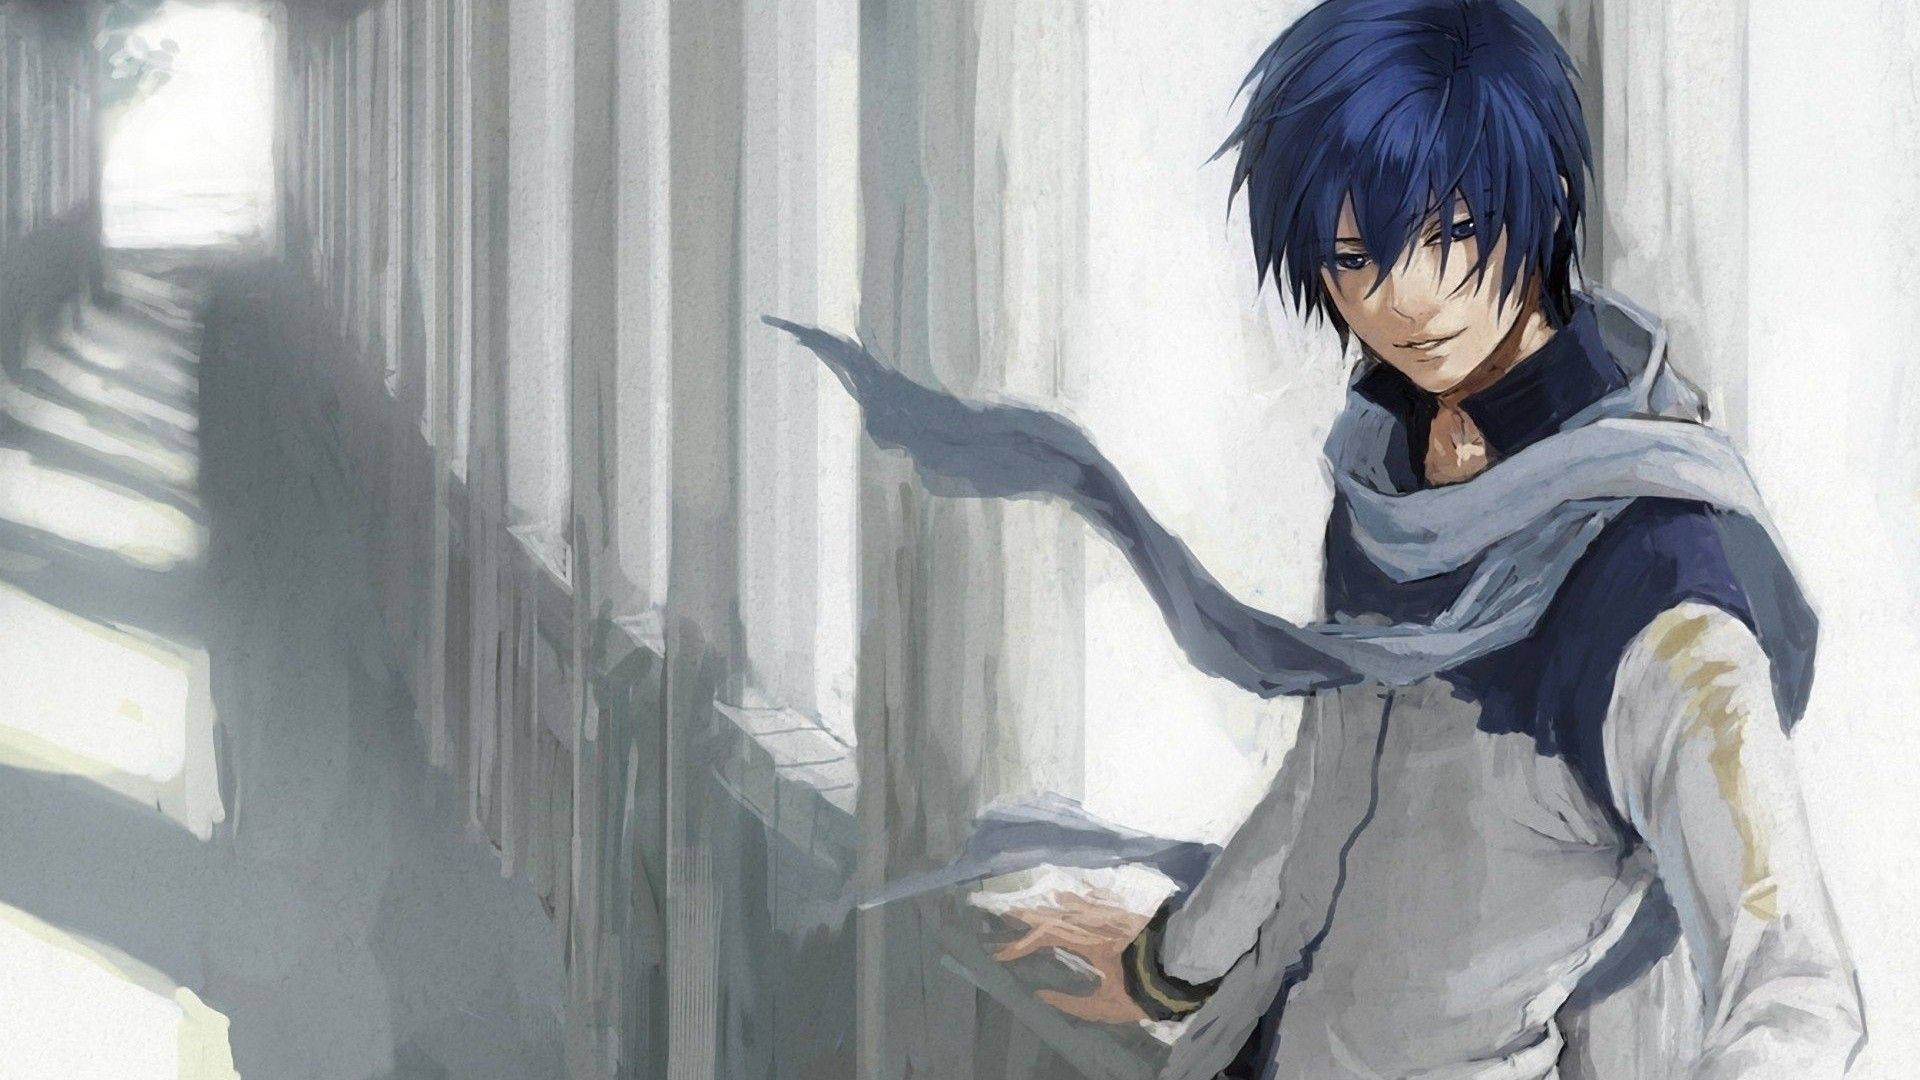 A Young Blue Haired Anime Boy Wallpaper